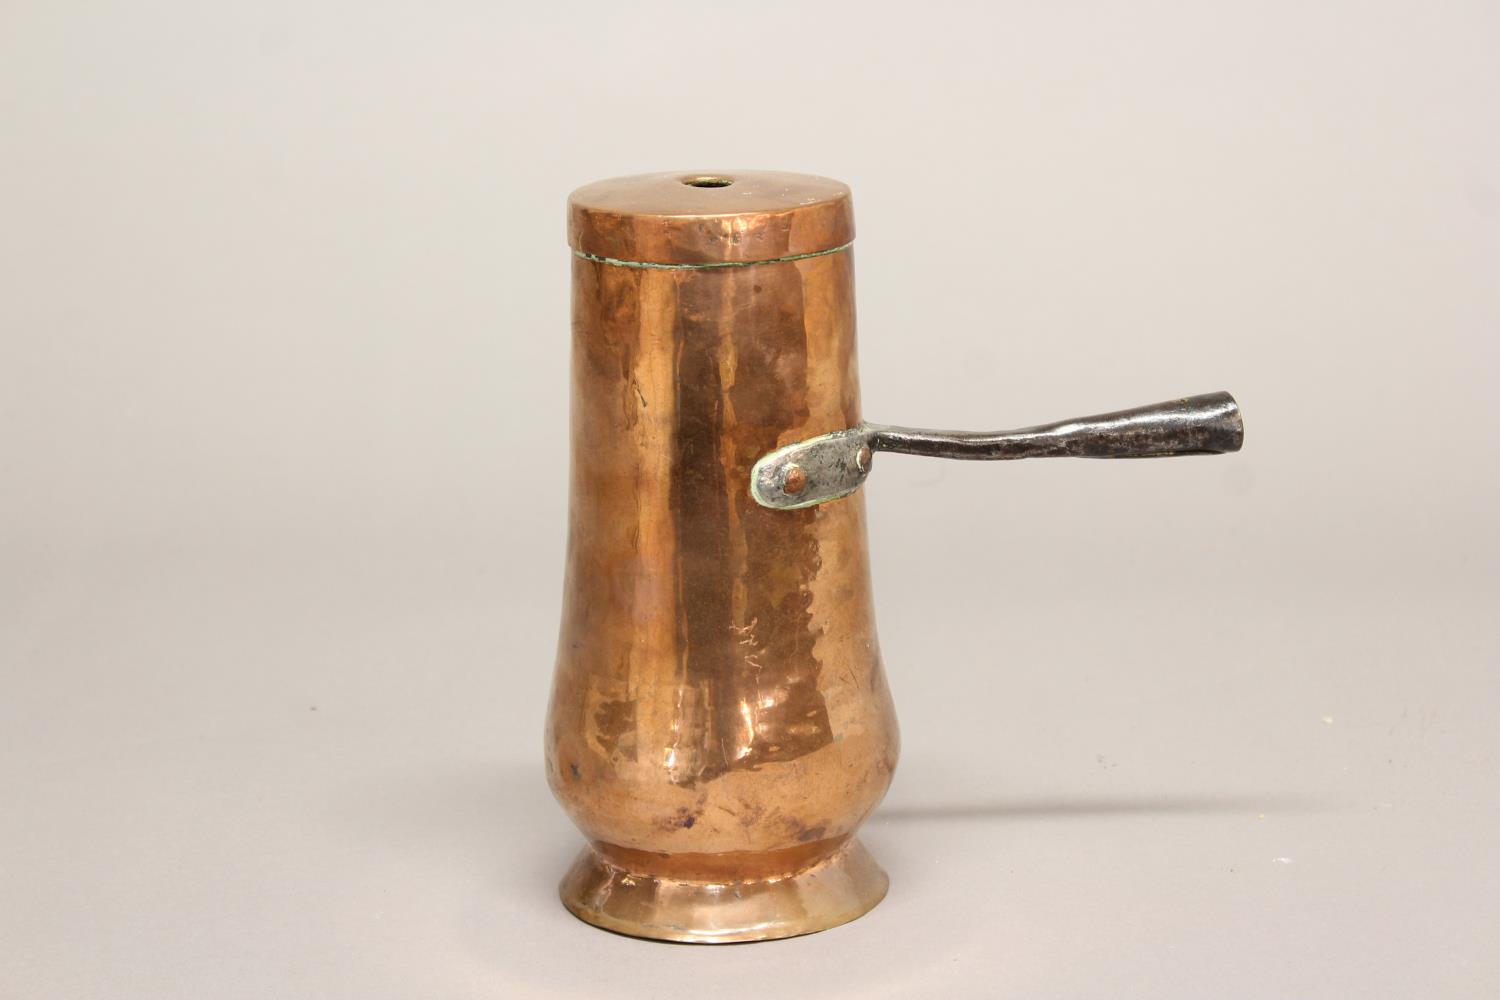 A LATE 18TH CENTURY FRENCH CHOCOLATE POT. A French copper chocolate pot of tall bellied form with